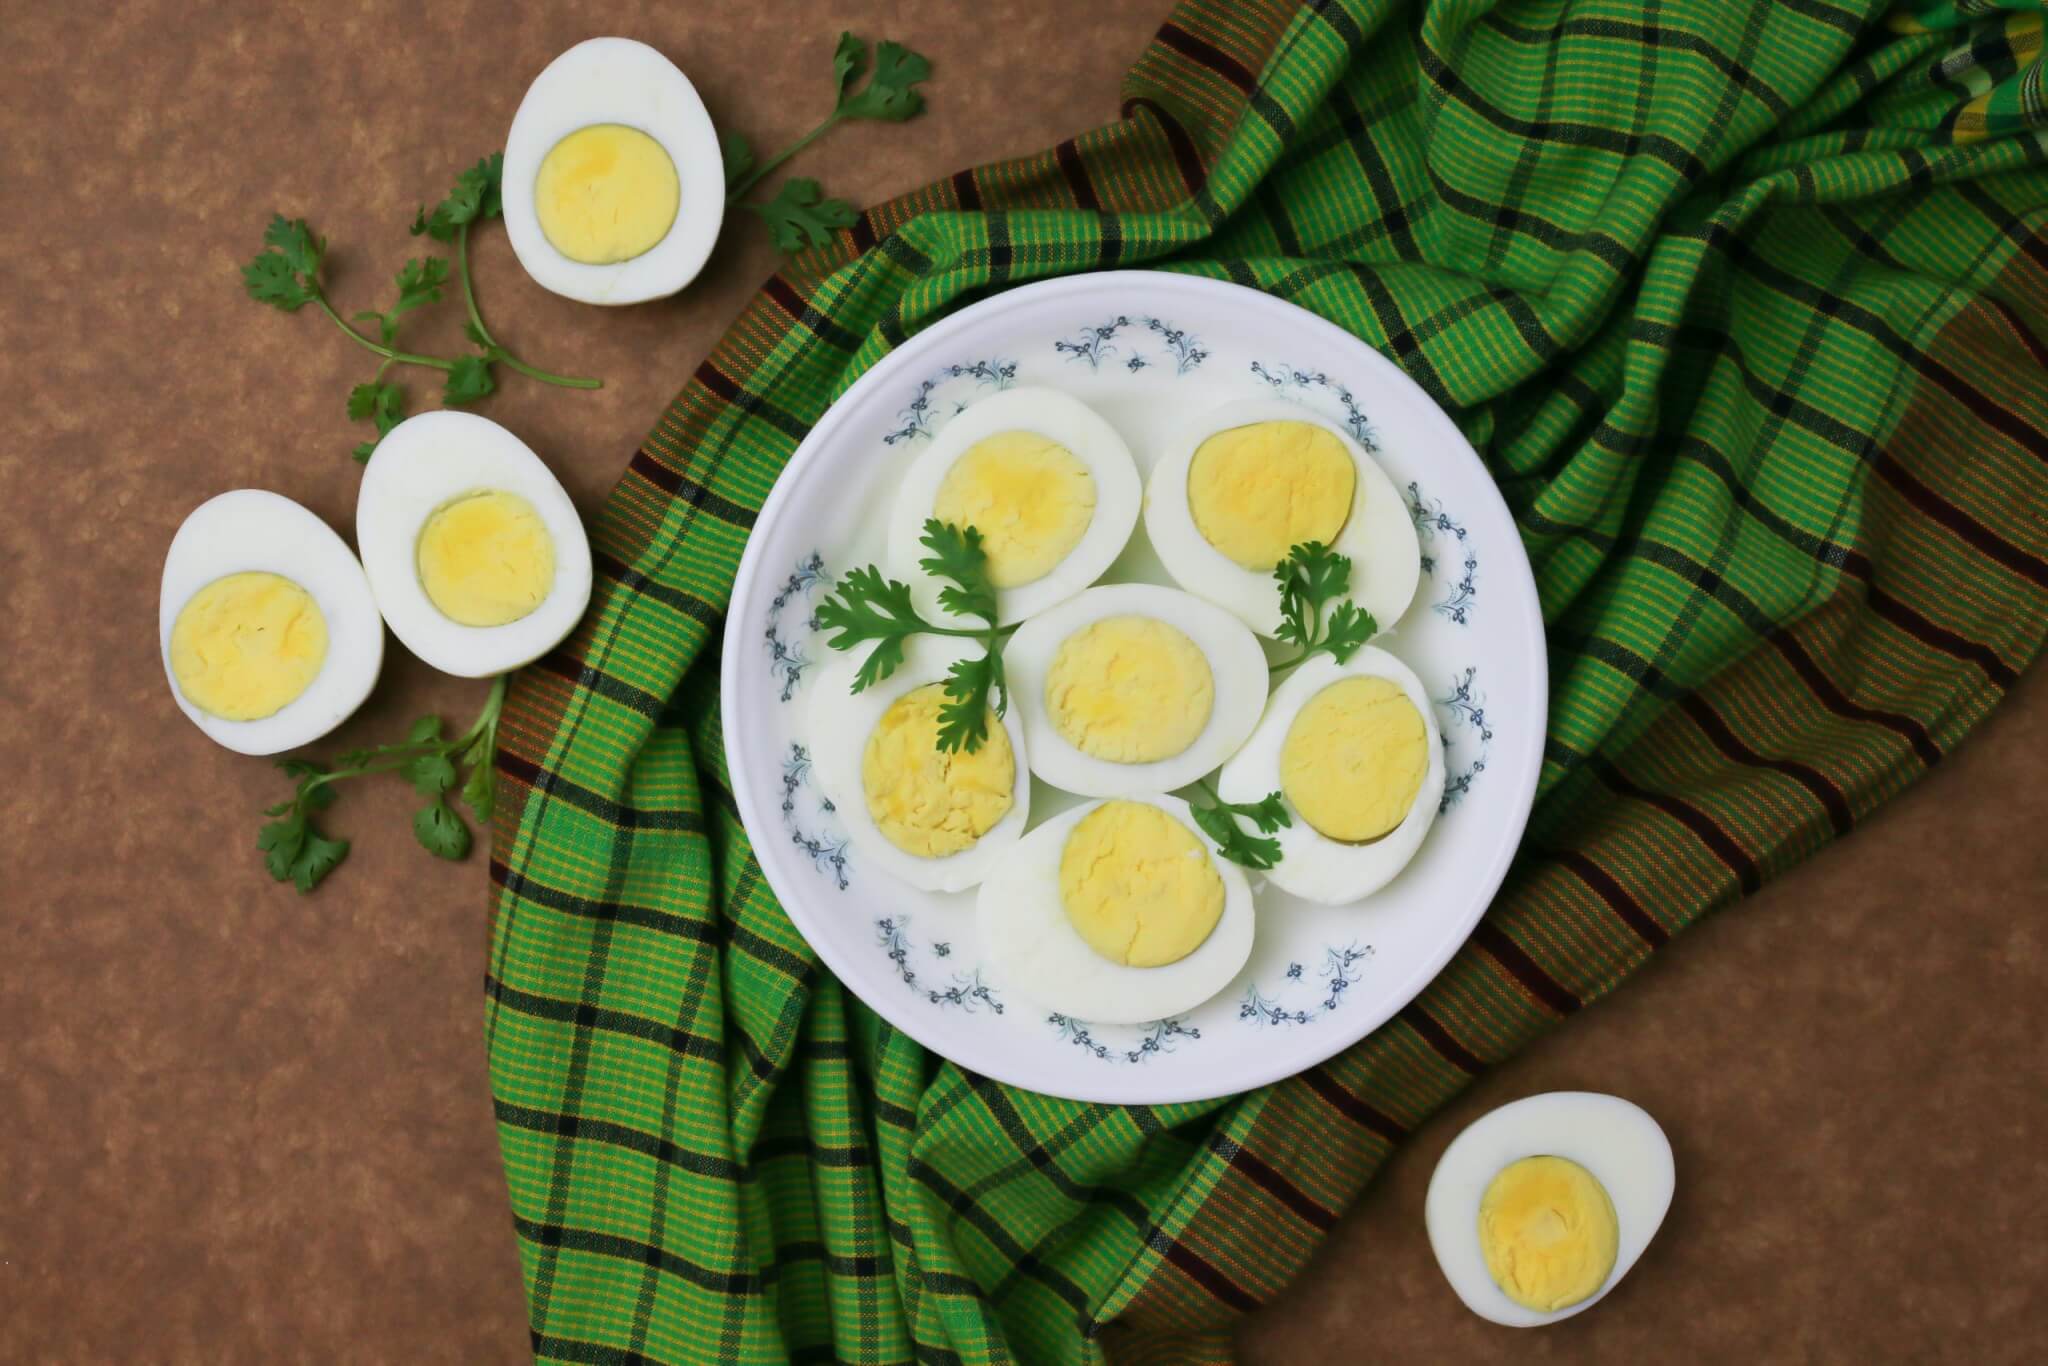 Hard-boiled eggs are one of the best ways to cook eggs.